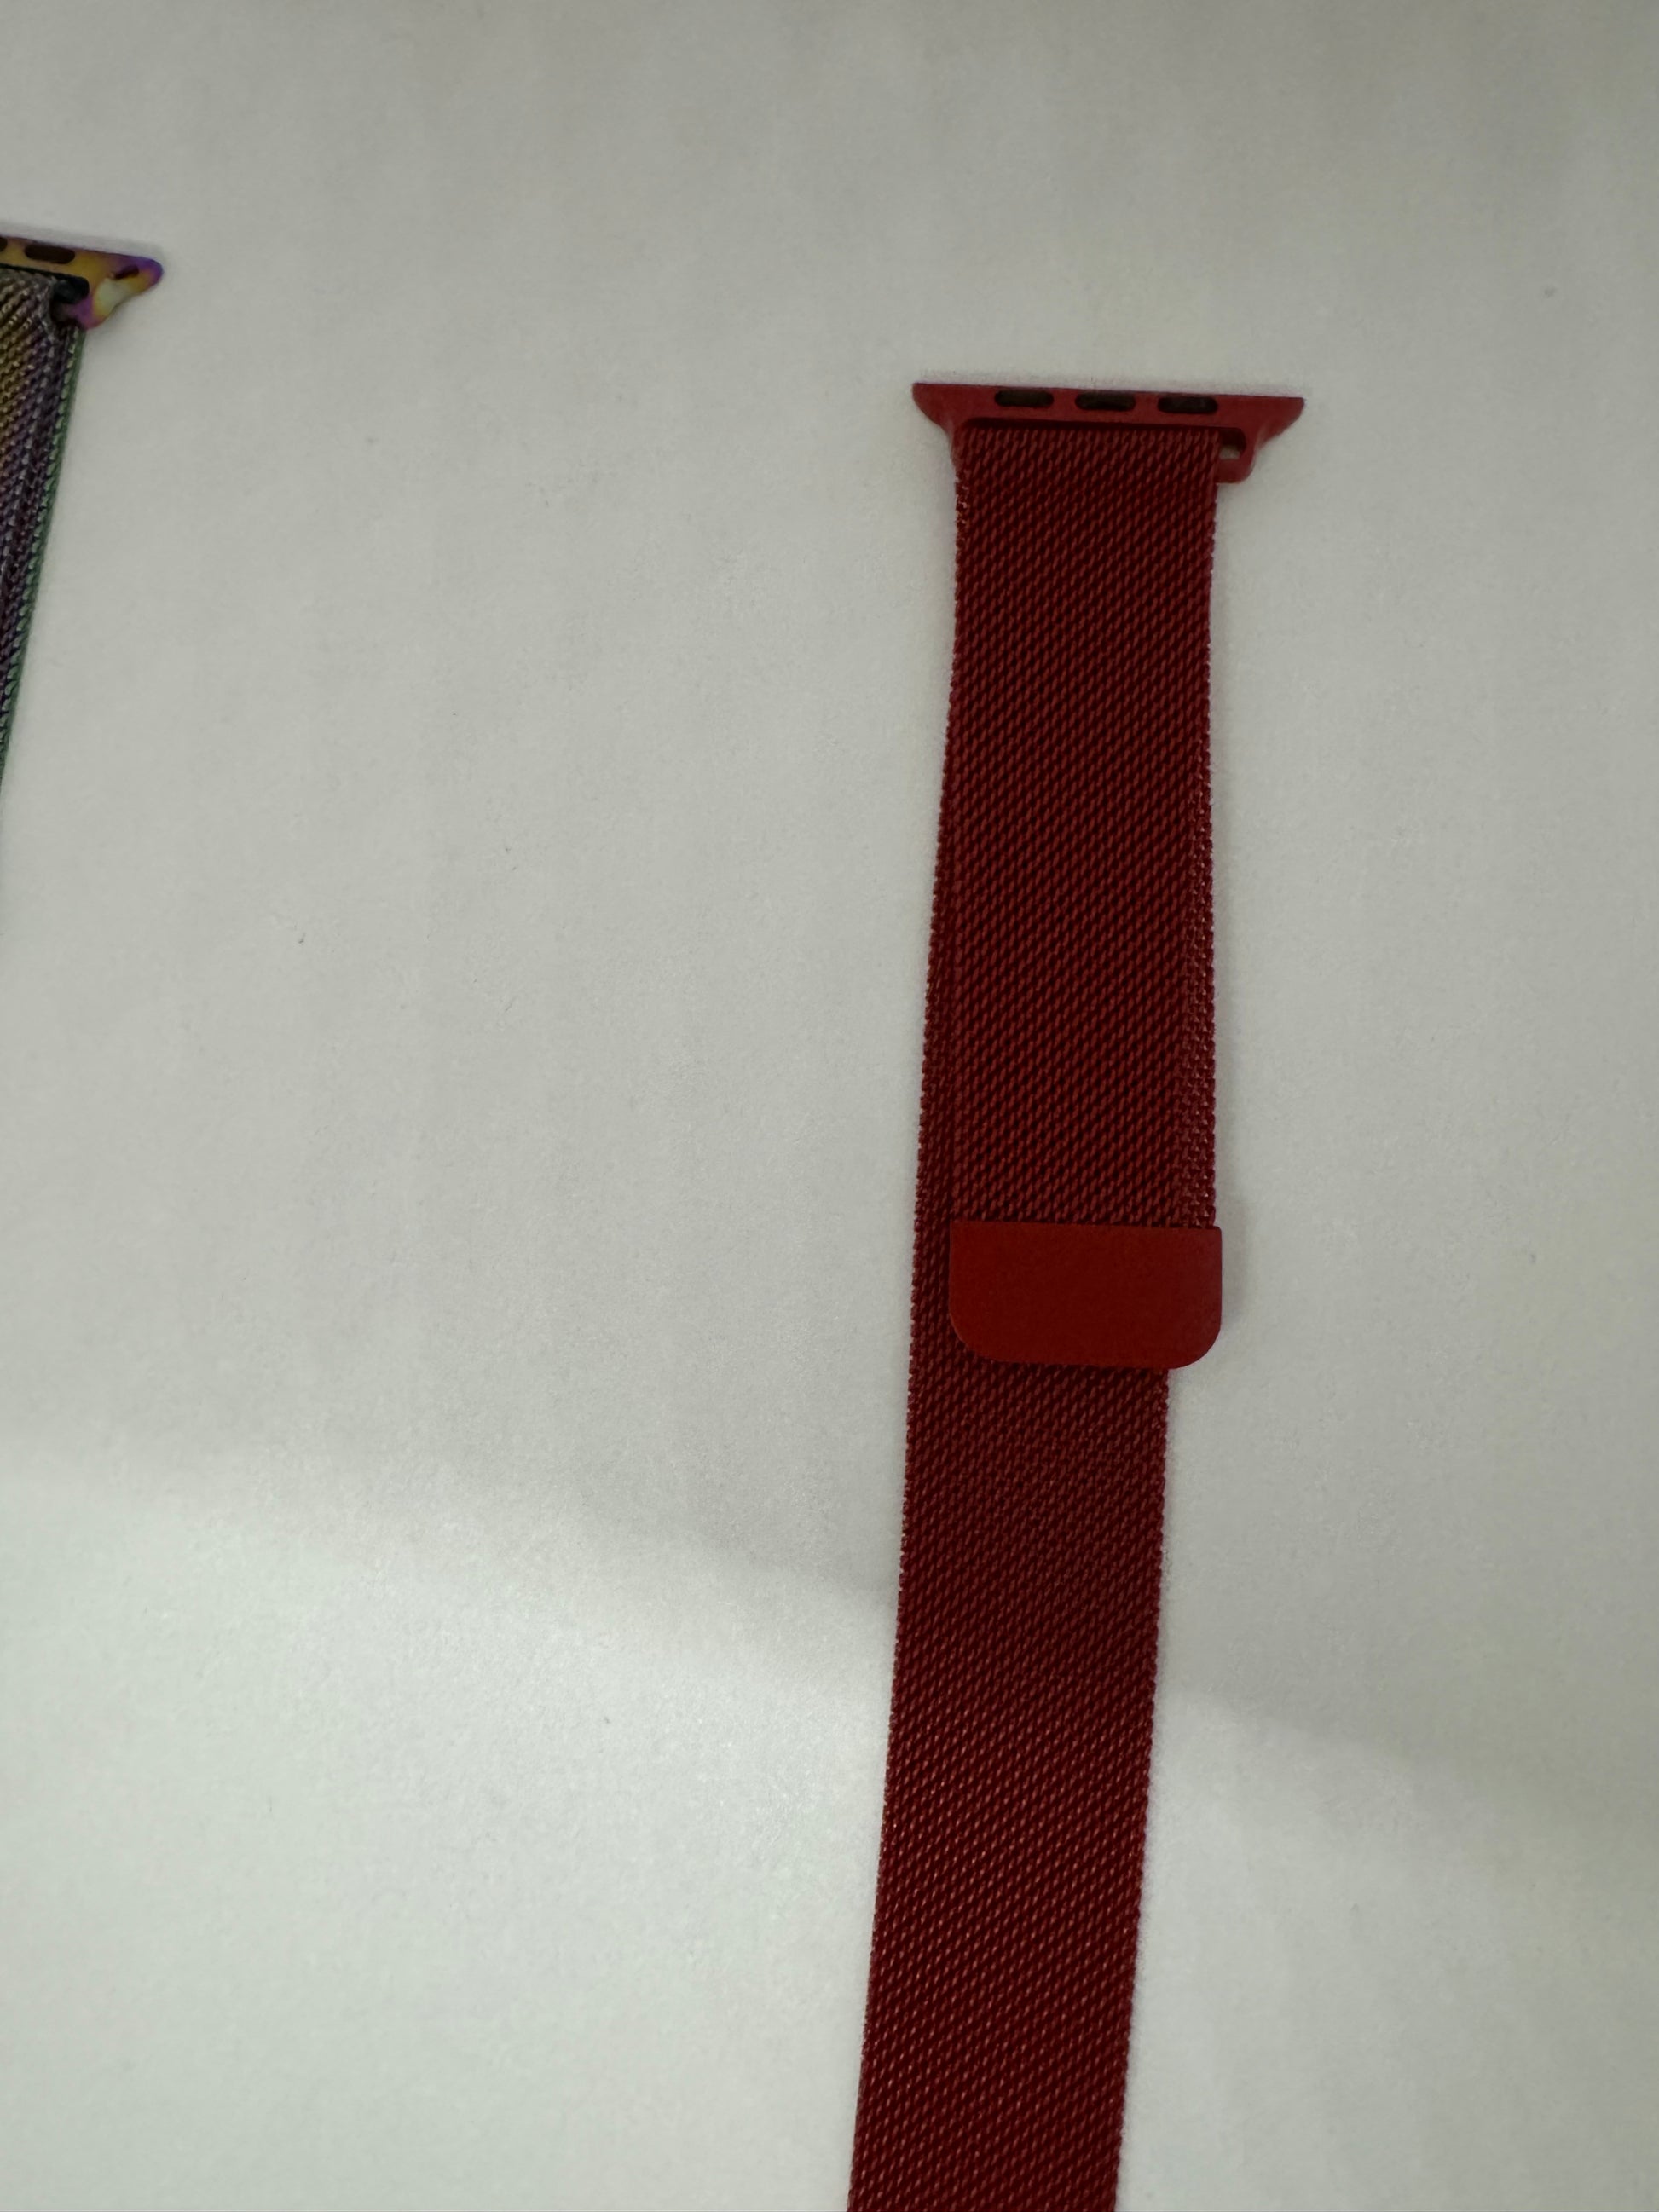 Be My AI: The picture shows two watch bands on a white surface. On the left side, there is a small portion of a watch band visible with a multicolored pattern. On the right side, there is a red watch band. The red watch band has a woven texture and is attached to a connector that is used to attach it to a watch. The connector is also red and has two small black pins. There is also a small red loop on the band.